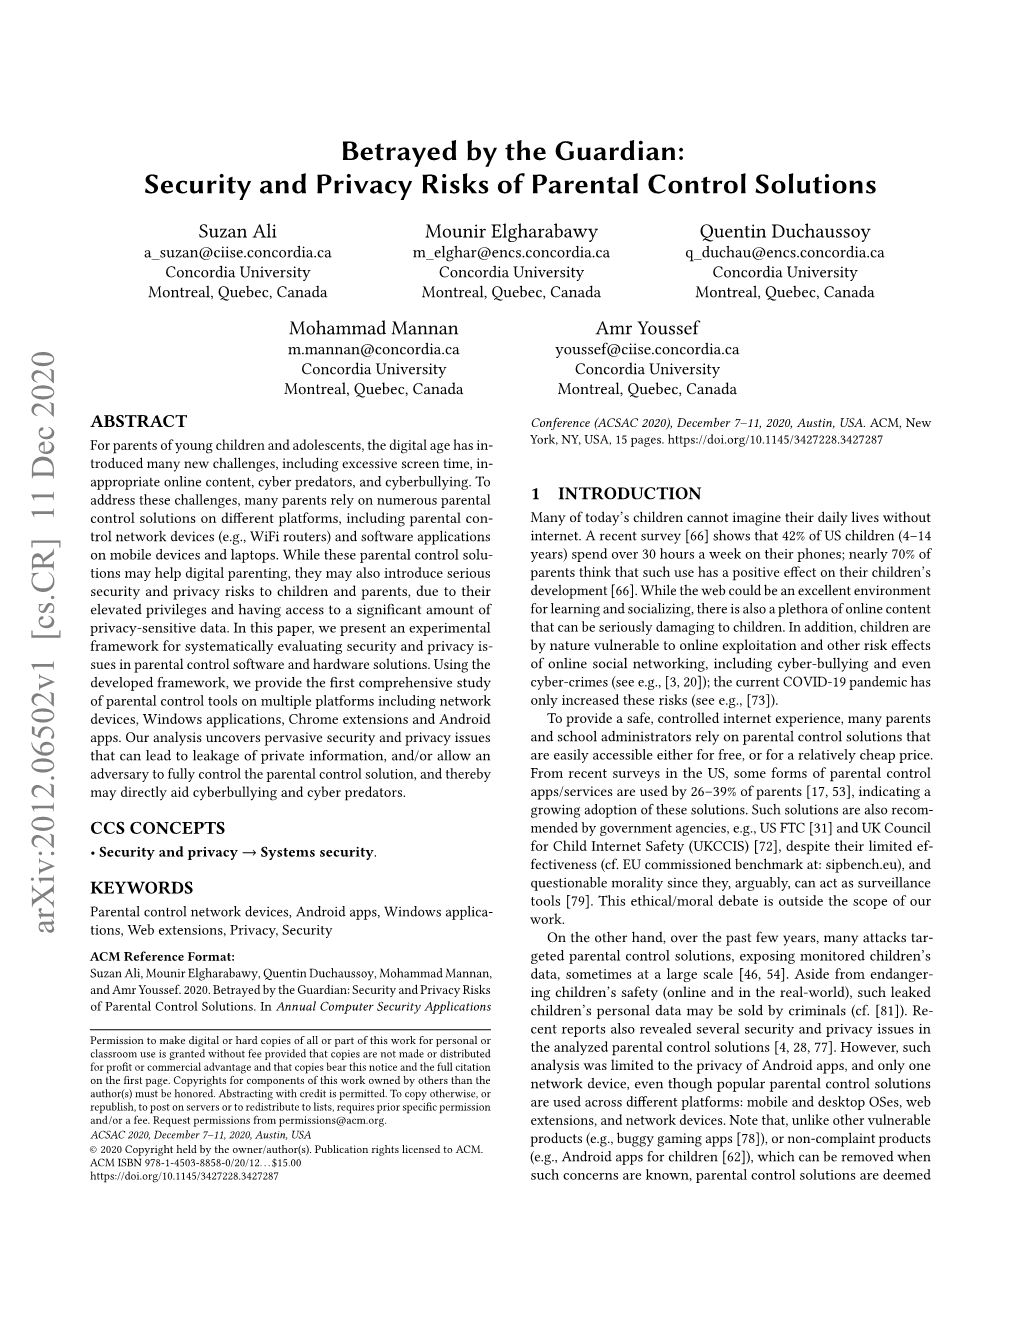 Security and Privacy Risks of Parental Control Solutions